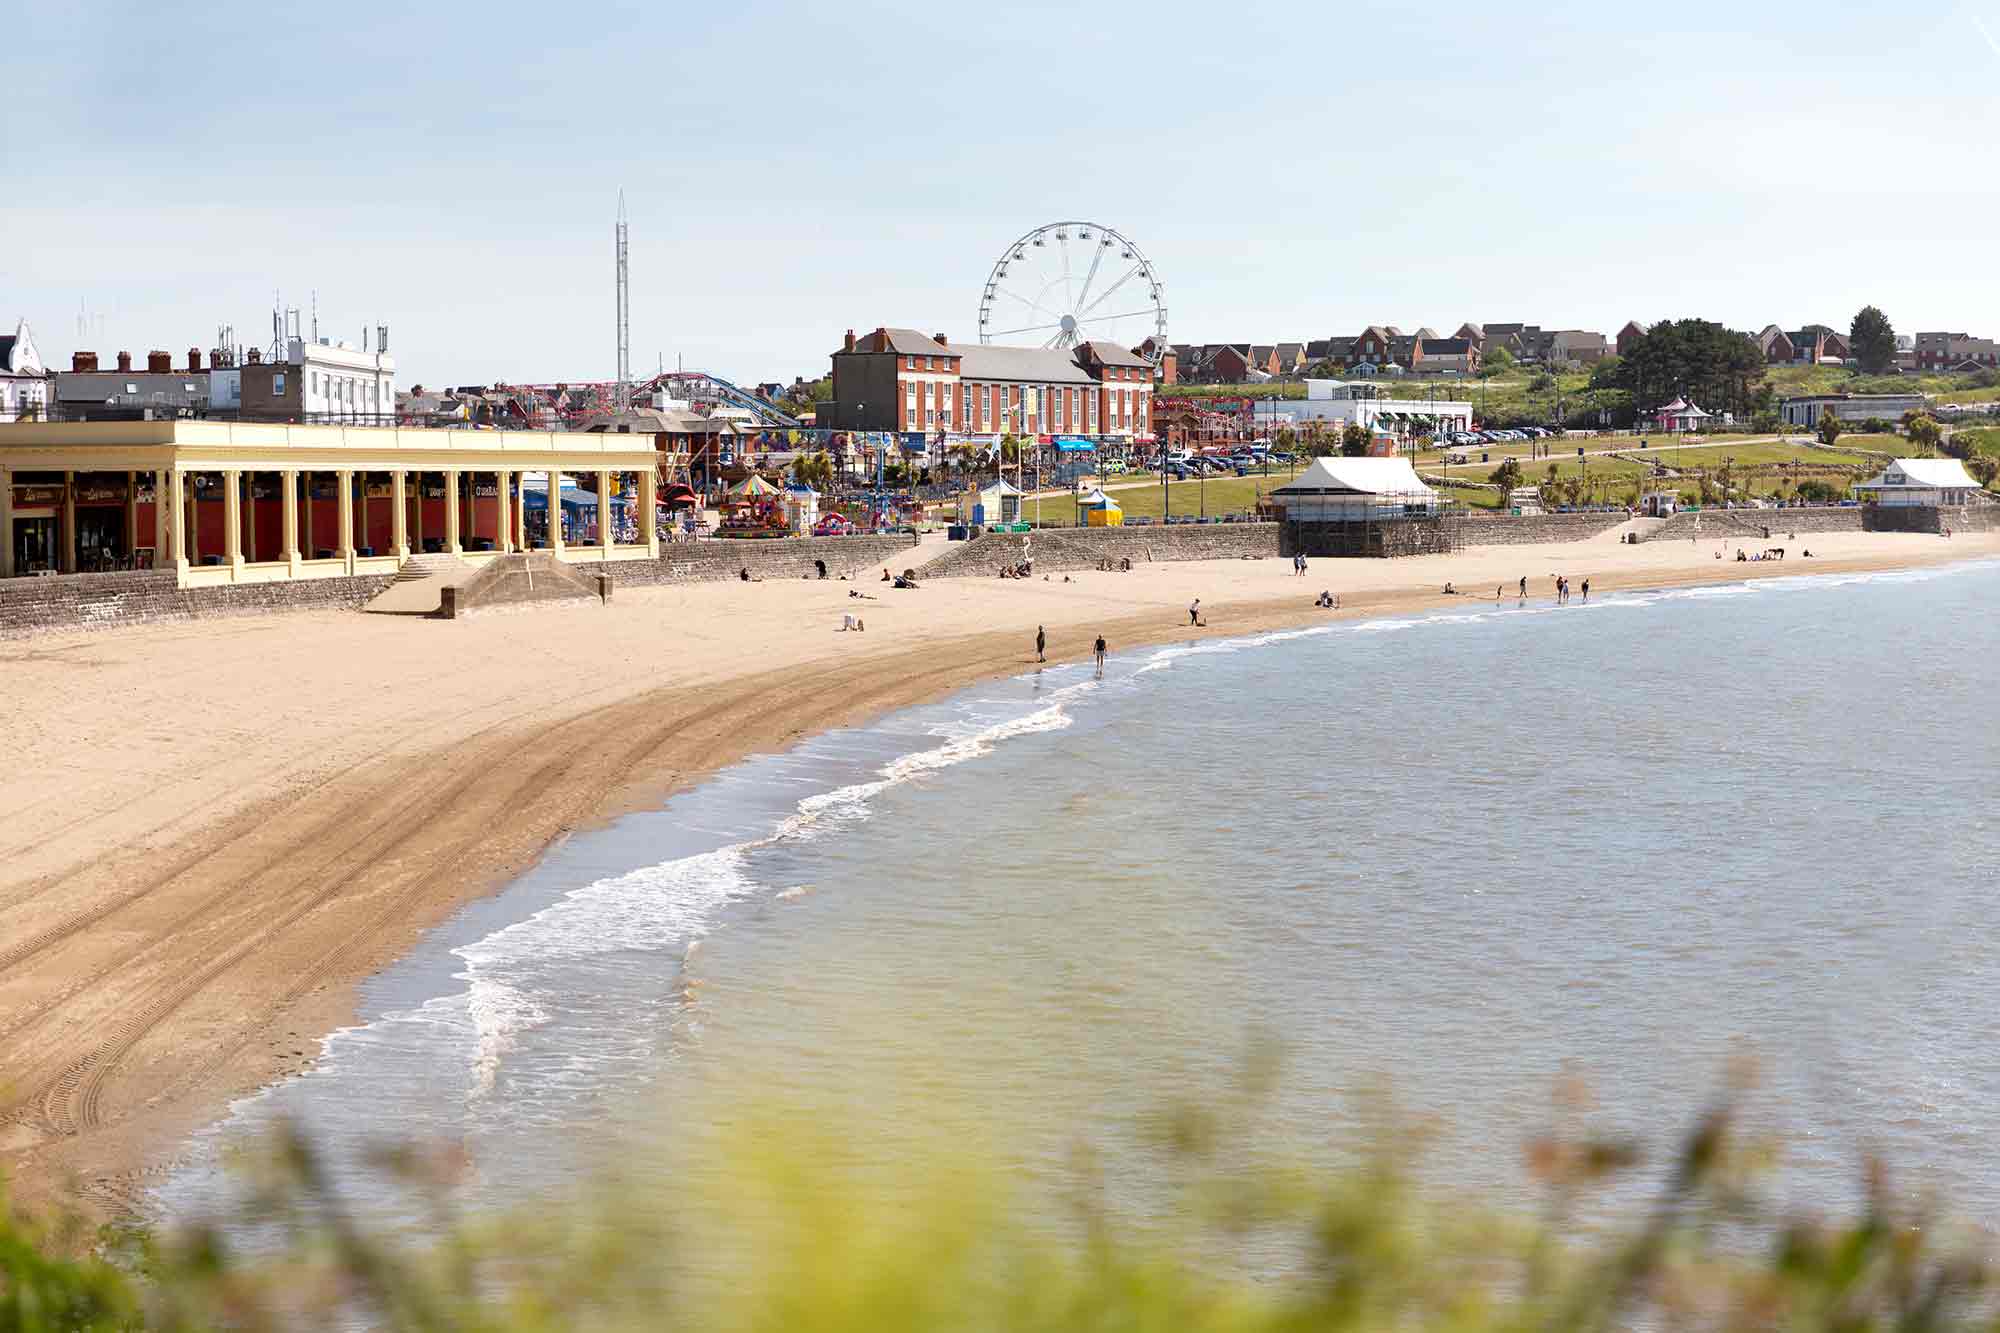 Barry Island West Shelter and Amusement Arcade on the beachfront